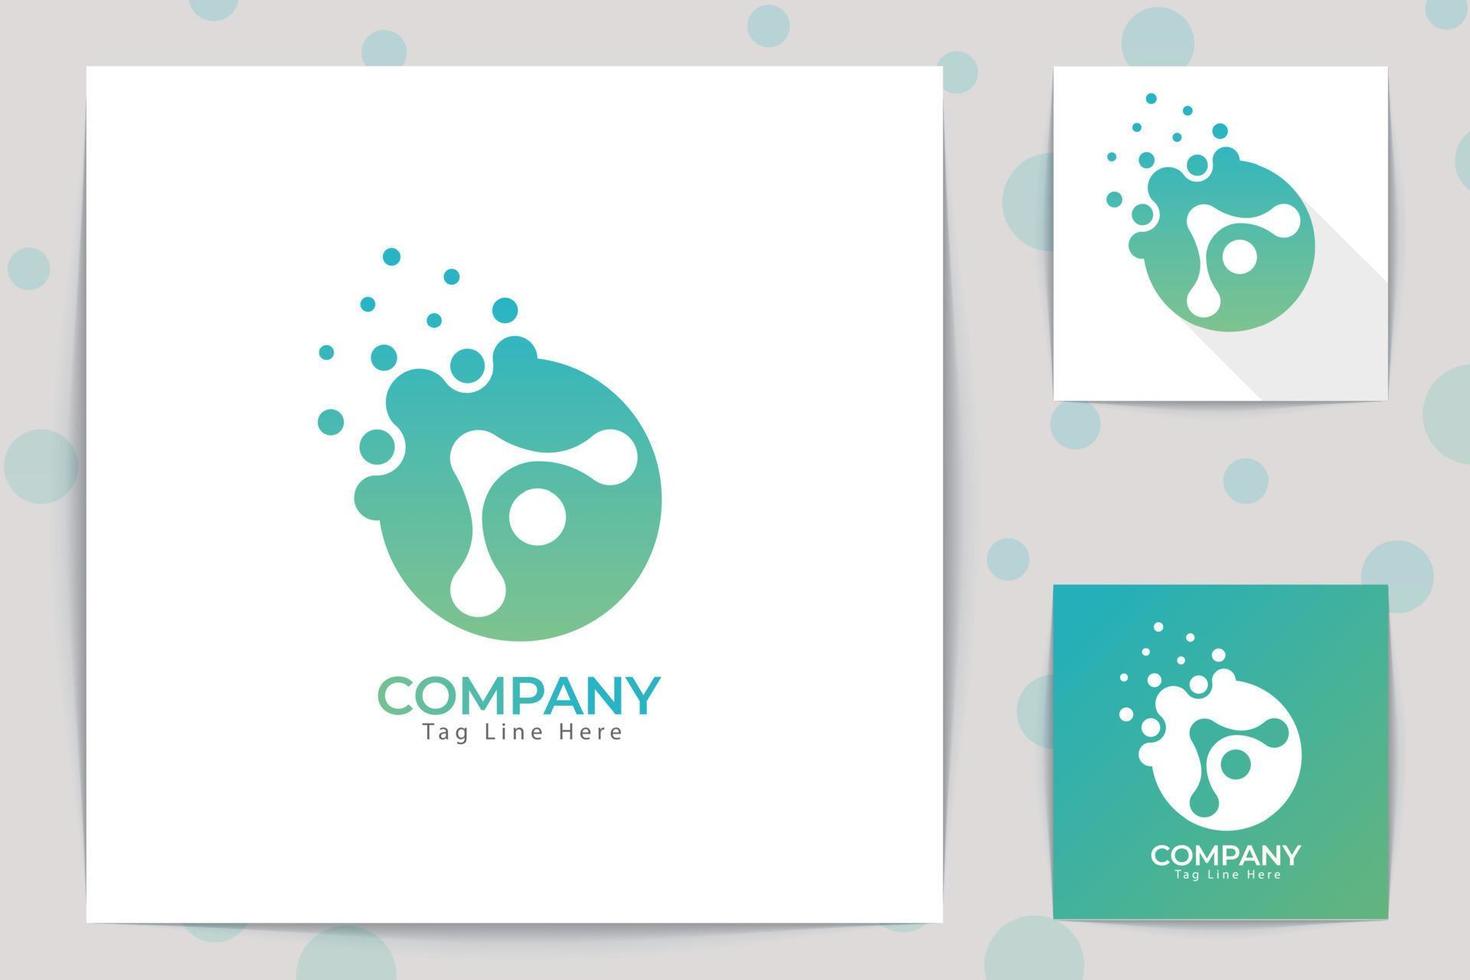 Creative  technology logo design with Premium Vector Free Mockup. Template Vector Illustration. Isolated On White Background.